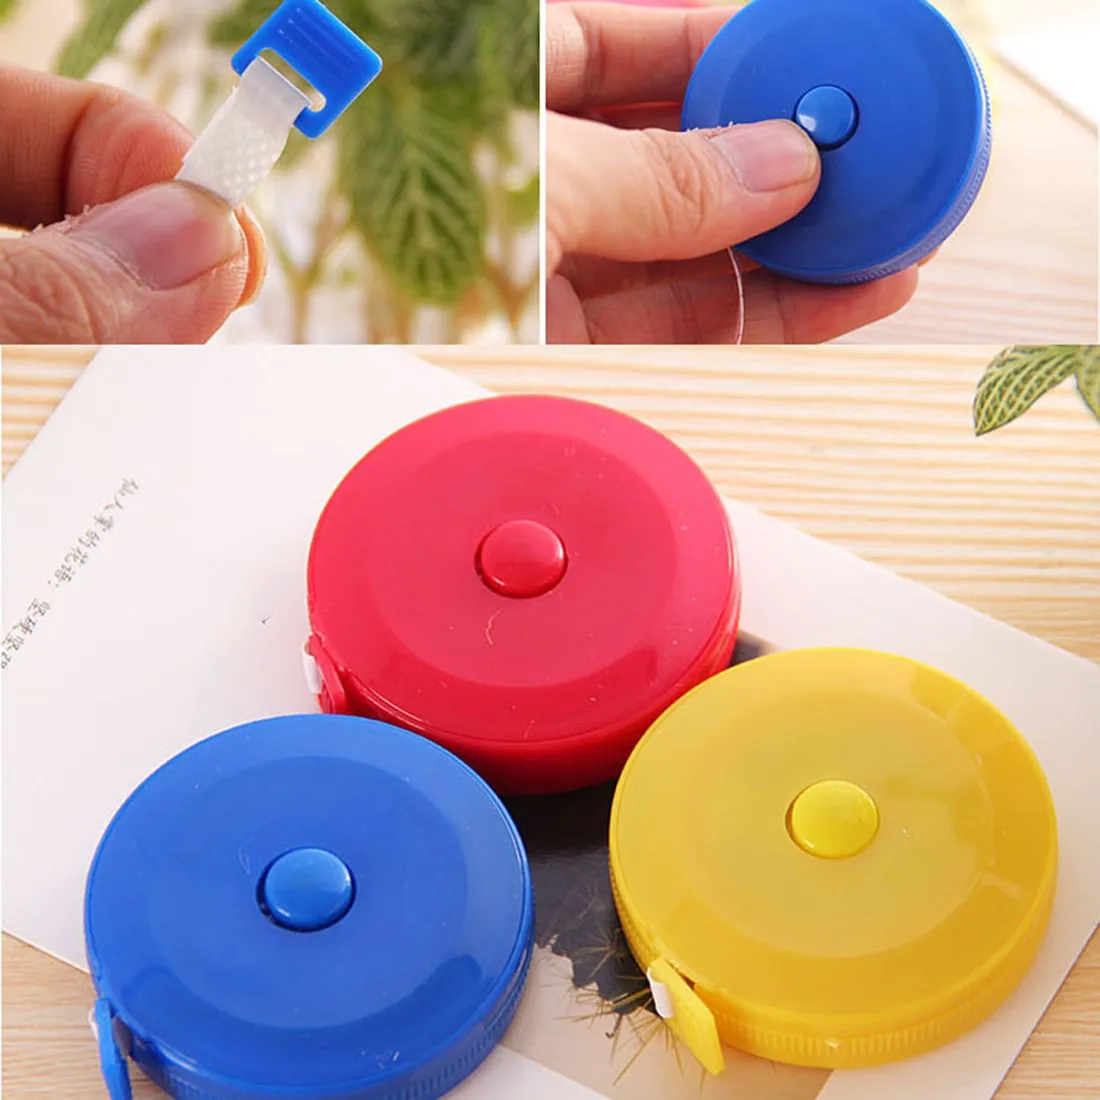 

Specially 1 PCS Useful Retractable Ruler Tape Measure Sewing Cloth Dieting Tailor 1.5M Mini Cute Style Random Color